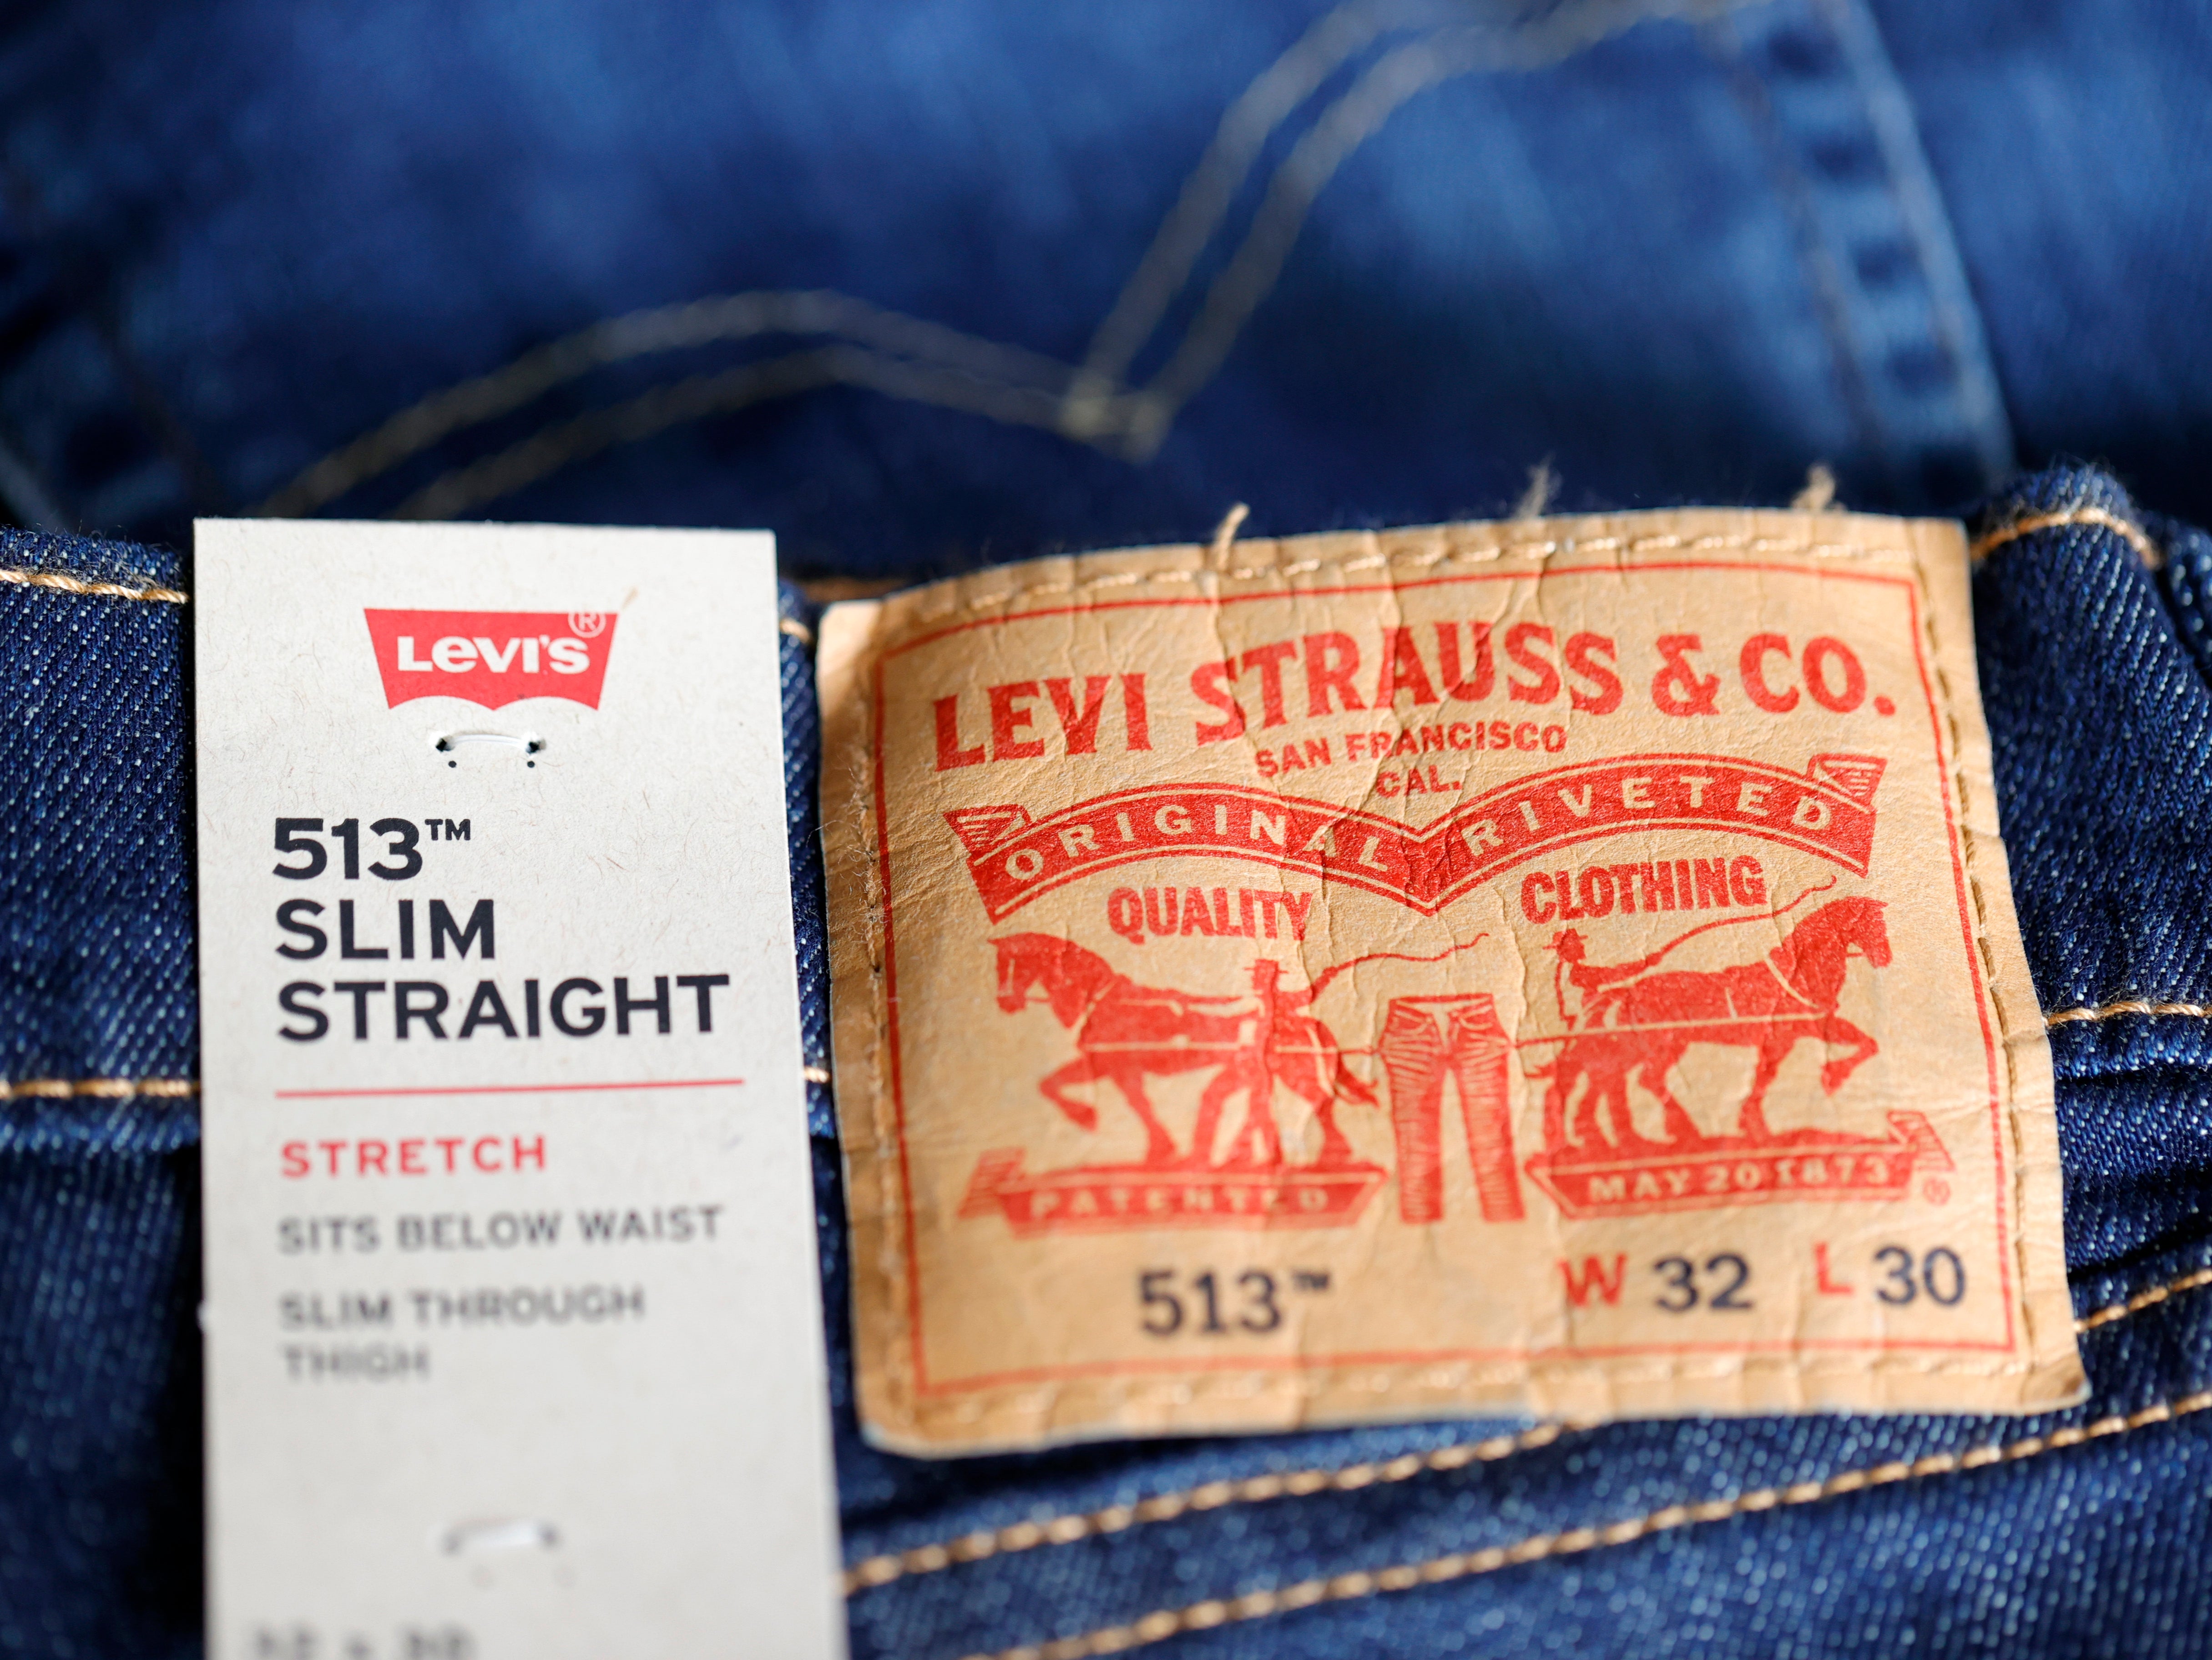 Levi’s halts sales of jeans in Russia and pledges $300,000 in donations ...